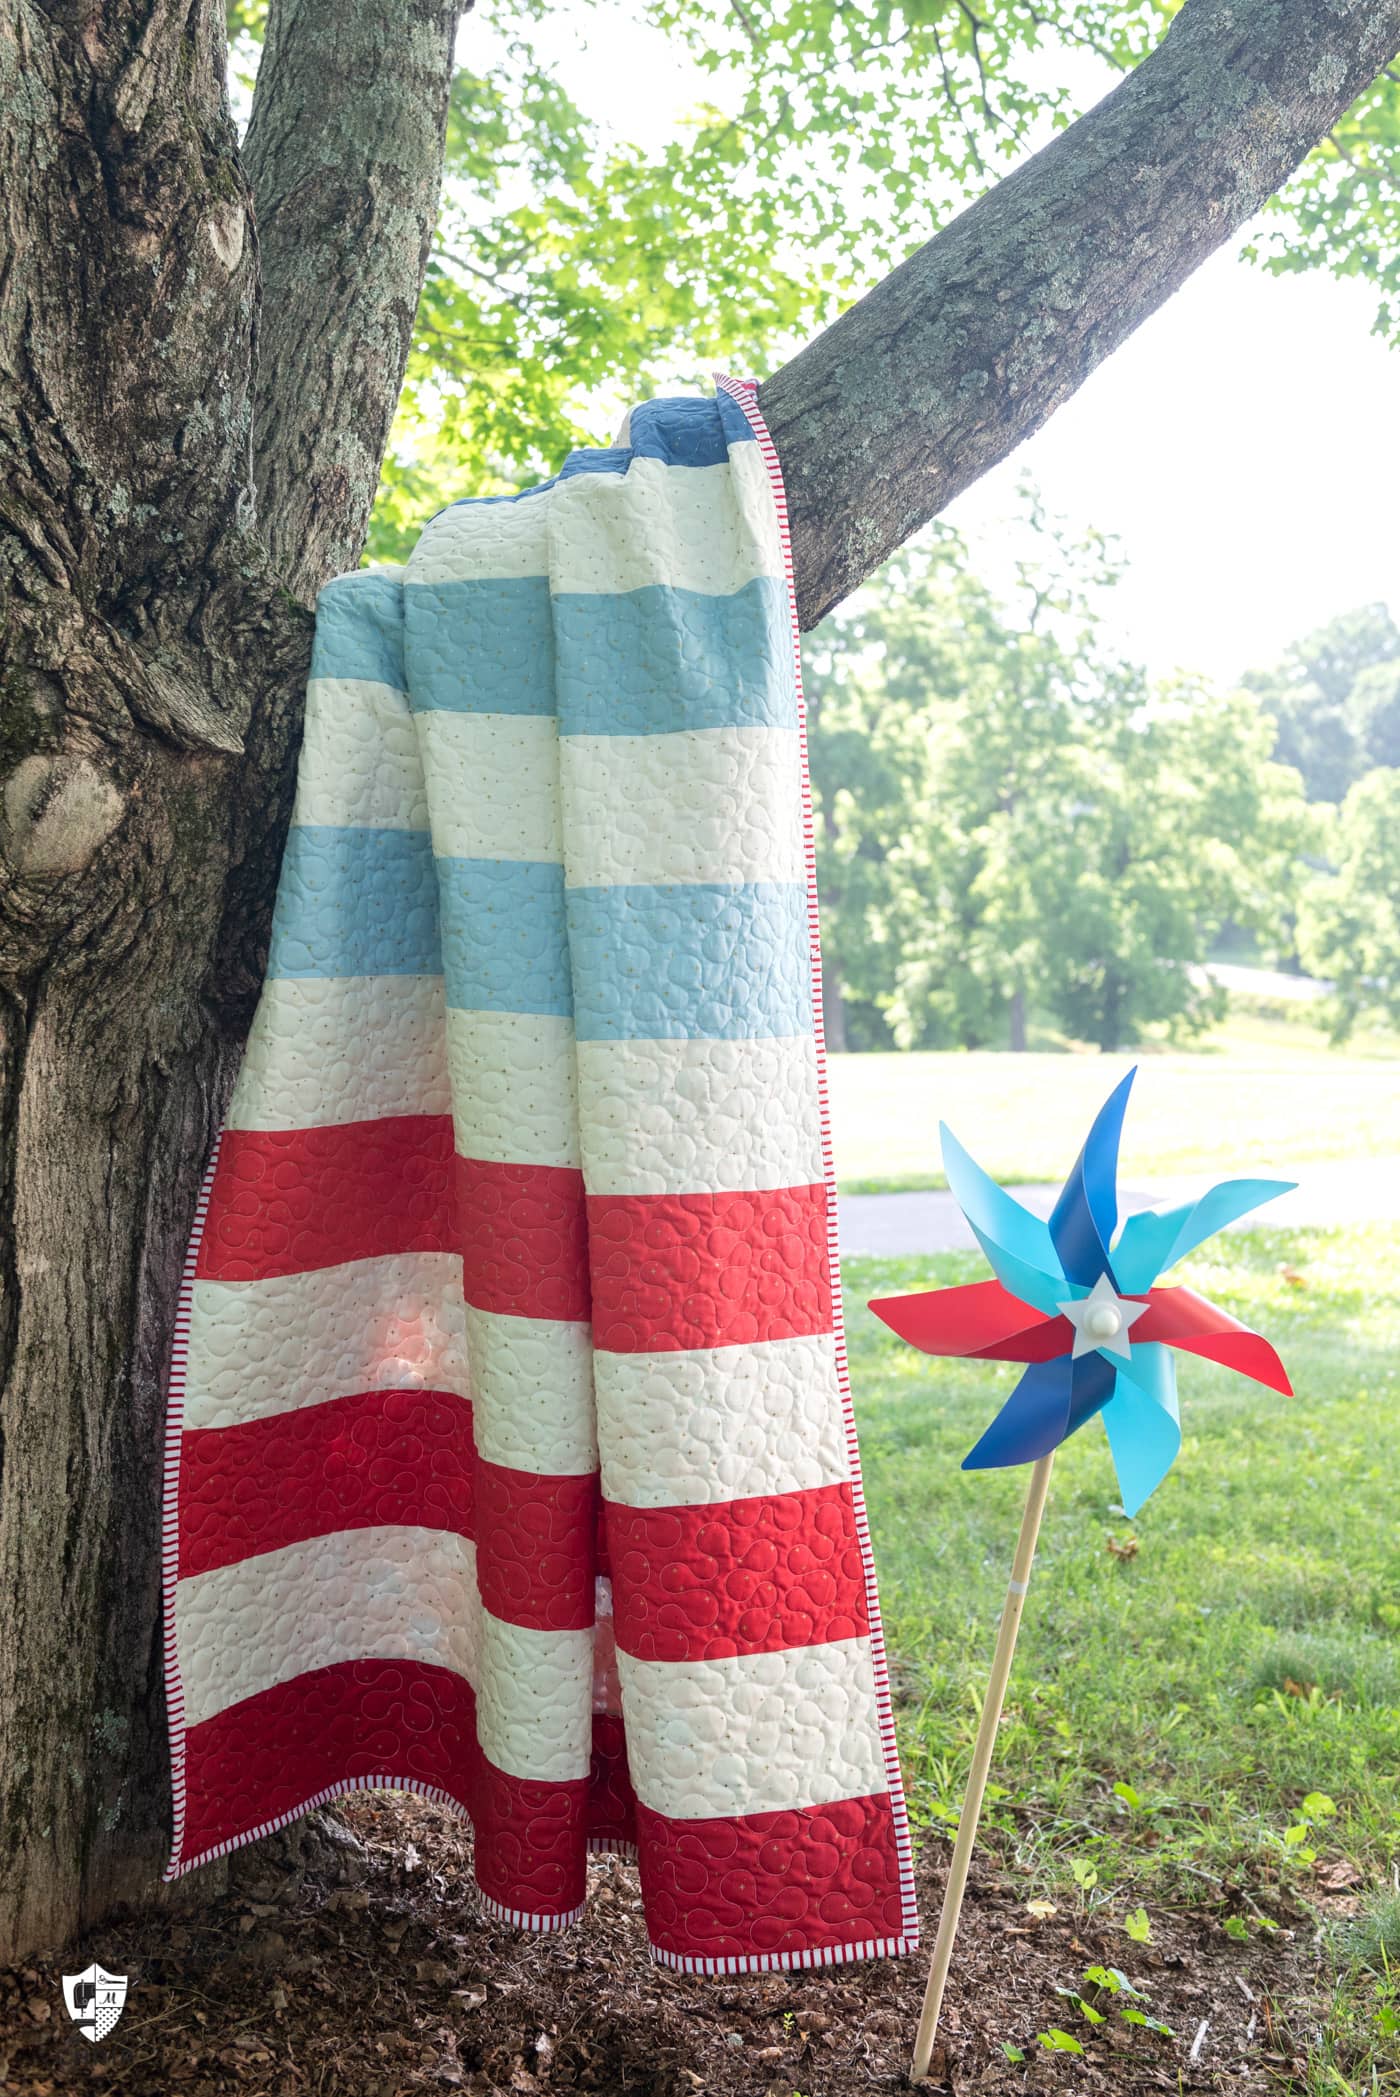 striped quilt hanging on tree outdoors with pinwheel